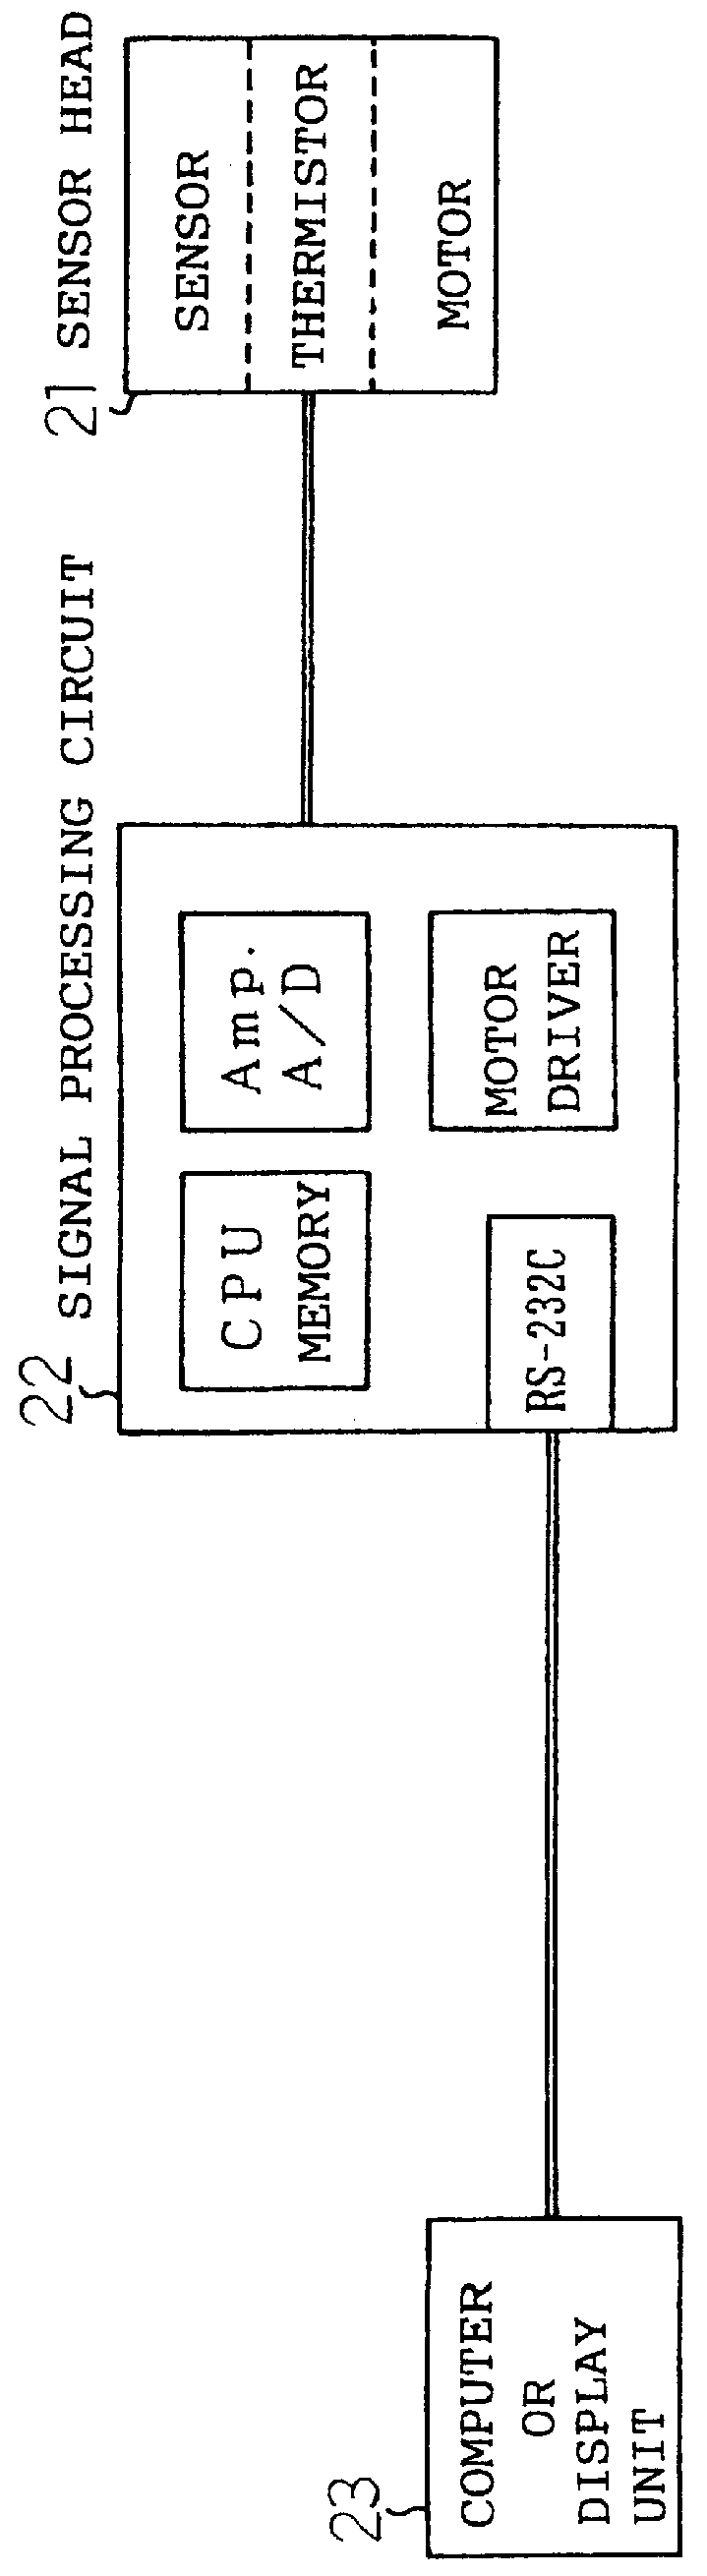 Movement pattern recognizing apparatus for detecting movements of human bodies and number of passed persons